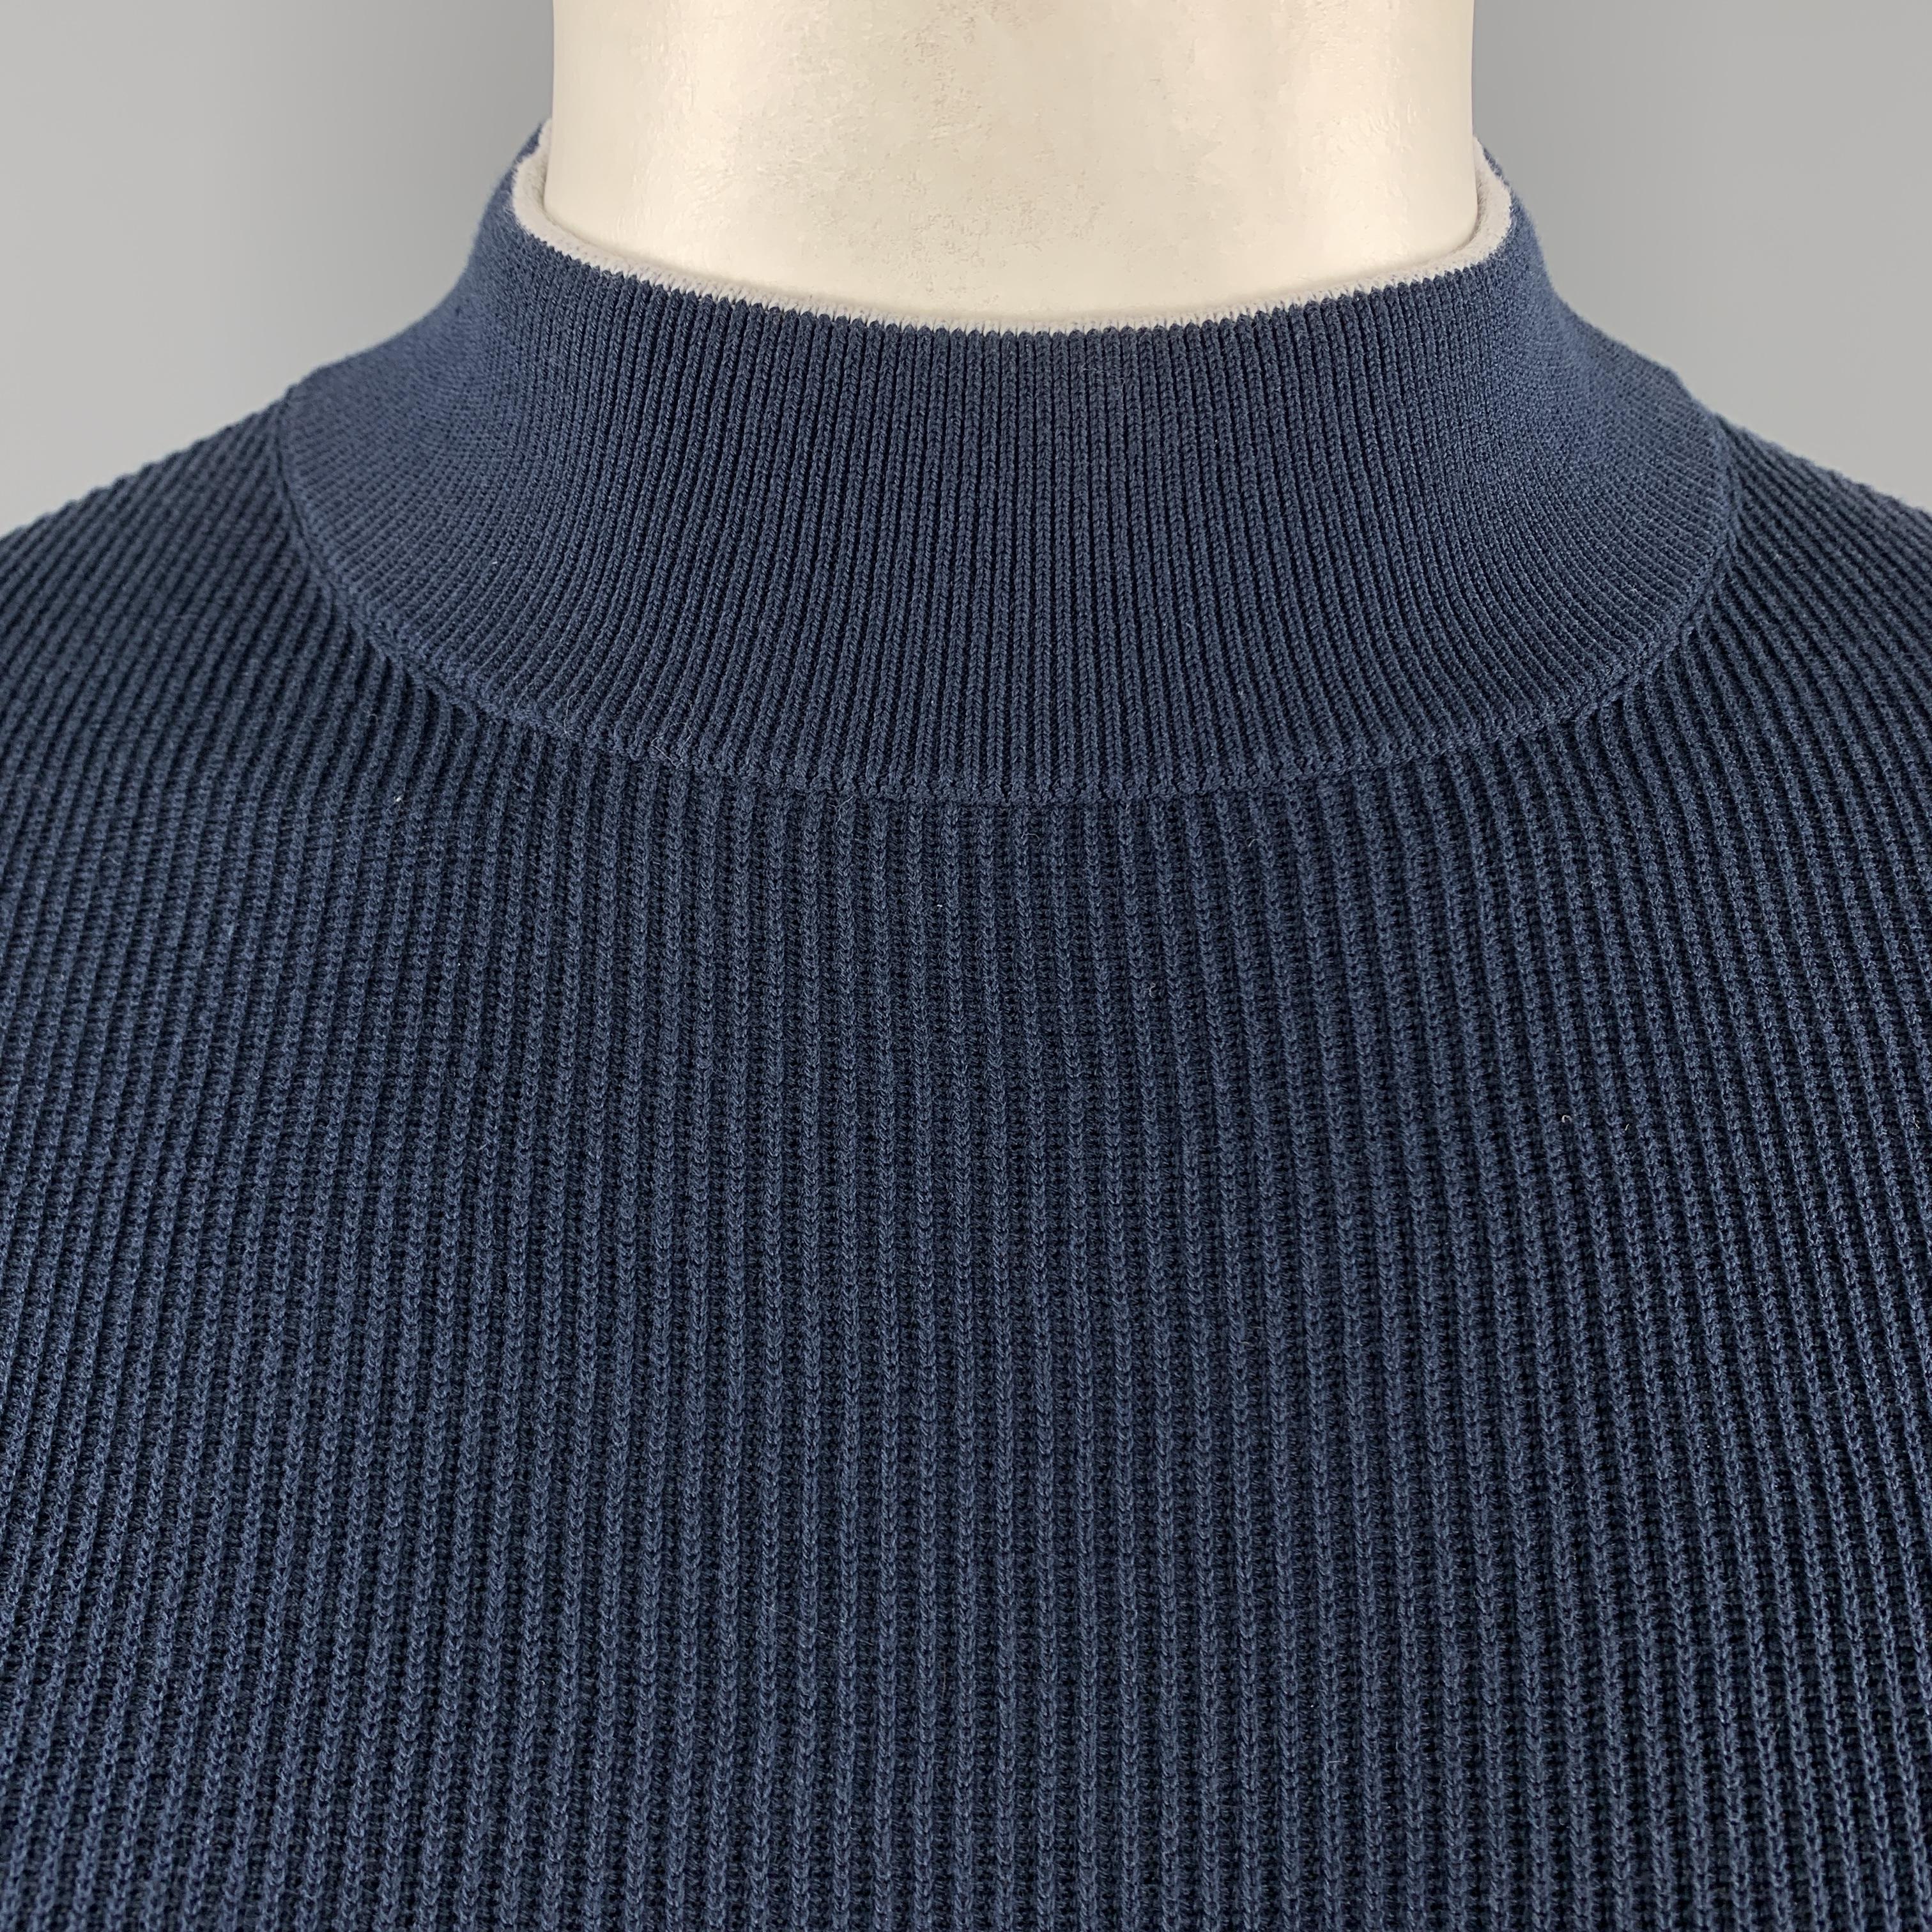 BRUNELLO CUCINELLI pullover comes in navy blue cotton ribbed knit with a high mock neck collar trimmed with a gray stripe. Made in Italy.

New without Tags. 
Marked: IT 54

Measurements:

Shoulder: 18 in.
Chest: 46 in.
Sleeve: 29 in.
Length: 30.5